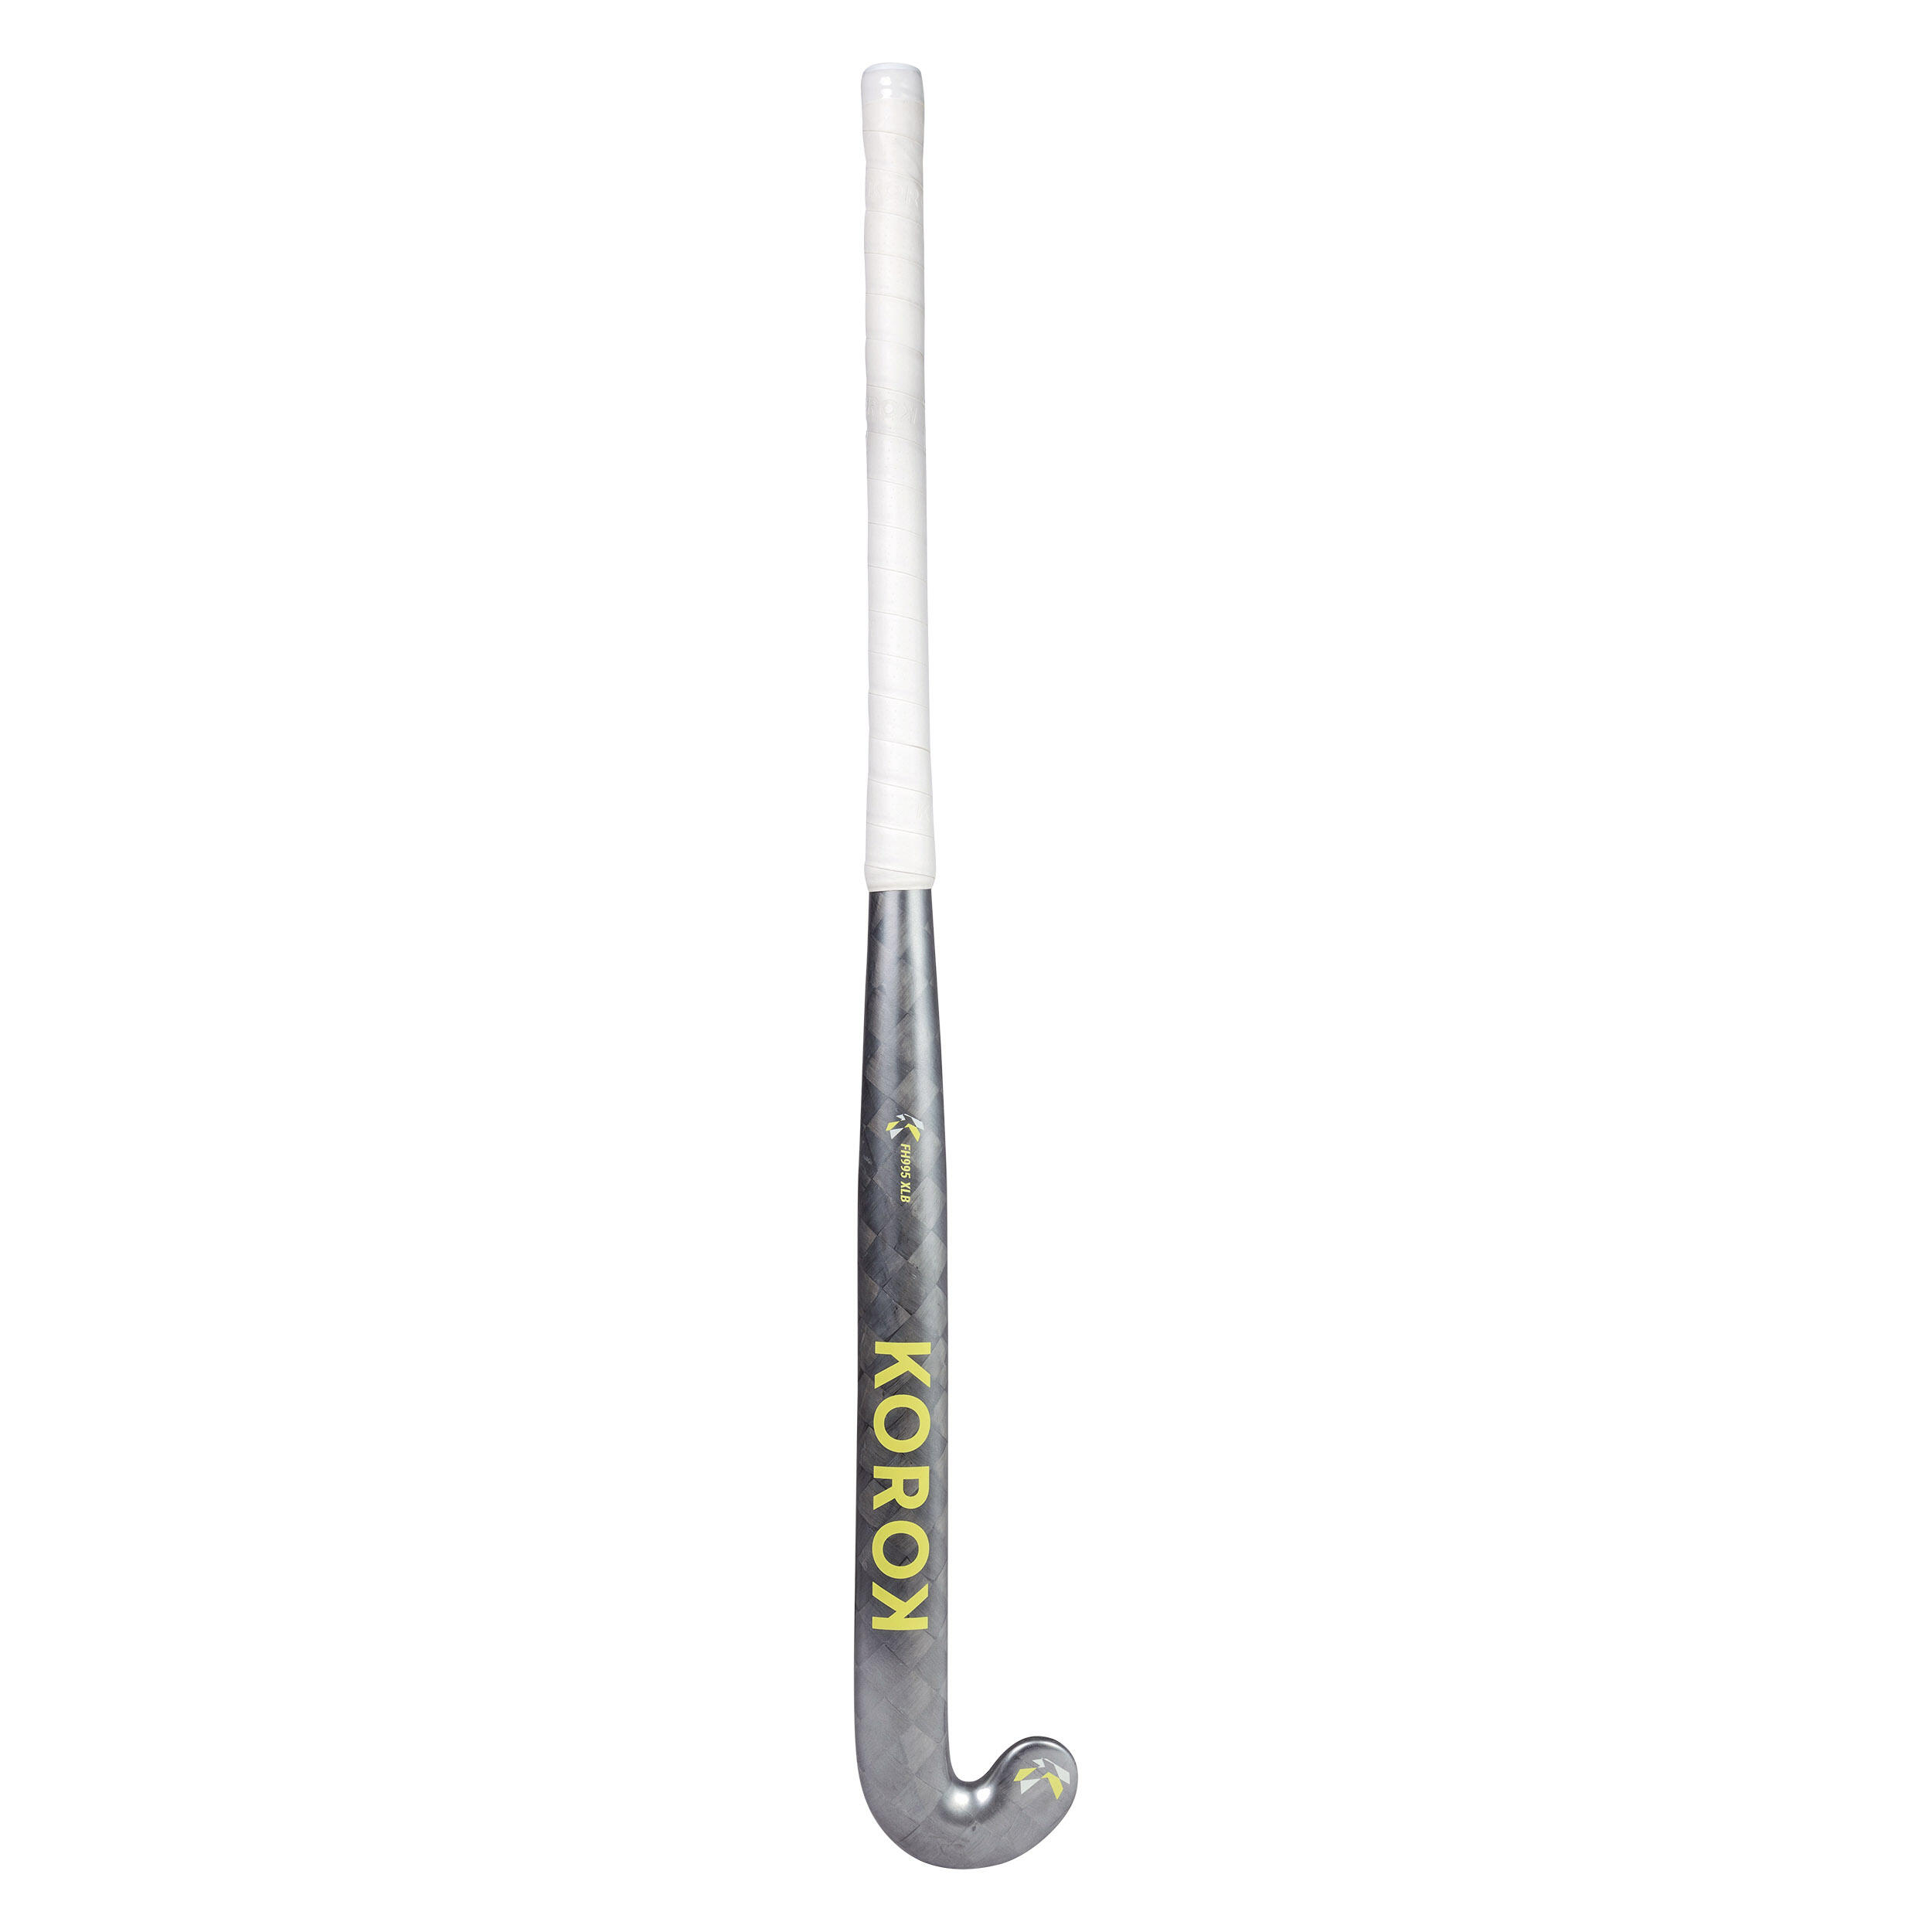 Adult Advanced 95% Carbon Extra Low Bow Field Hockey Stick FH995 - Grey/Yellow 7/12